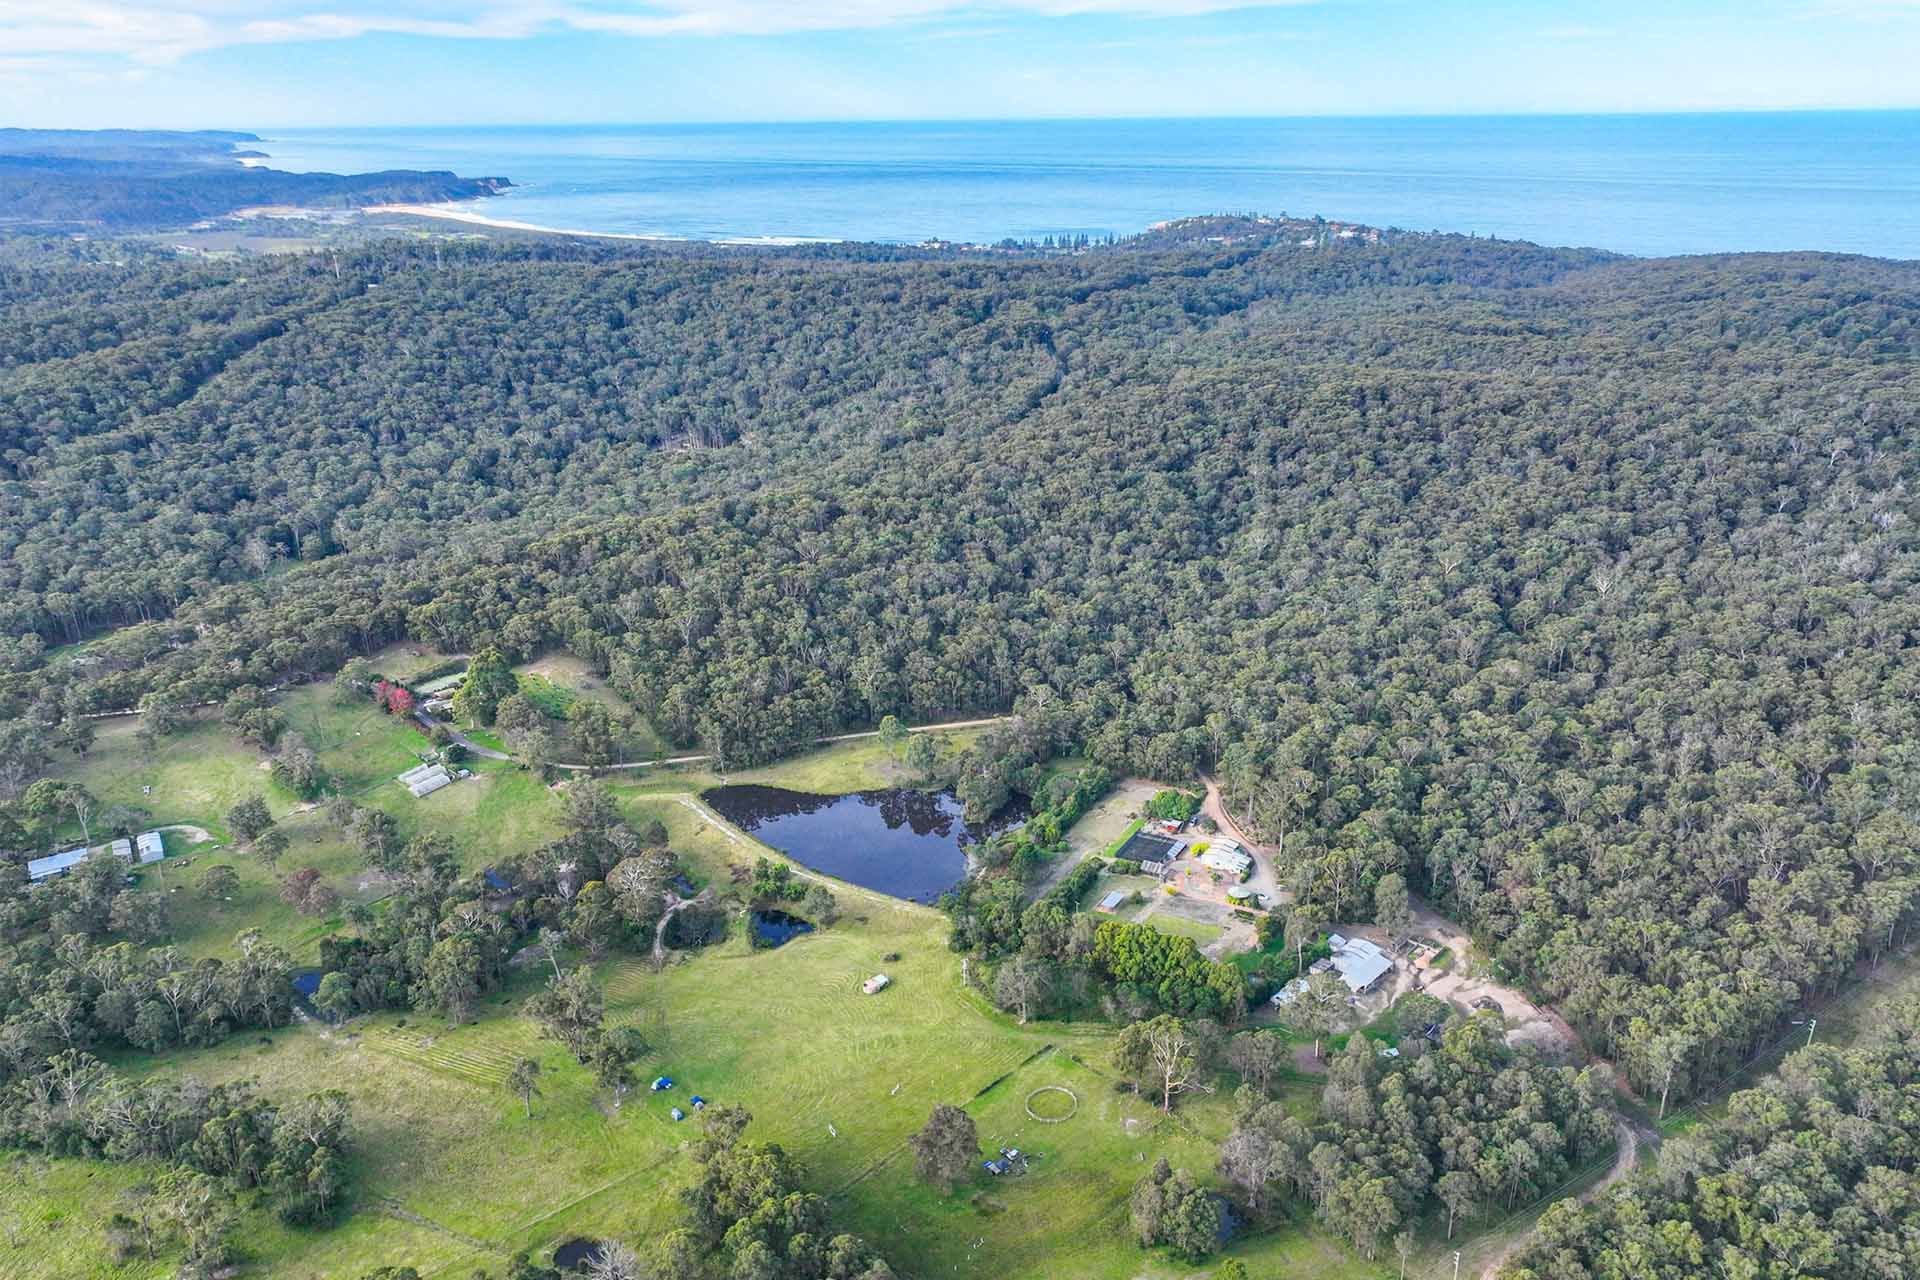 Camping, Cabins and hotels on the Sapphire Coast, NSW